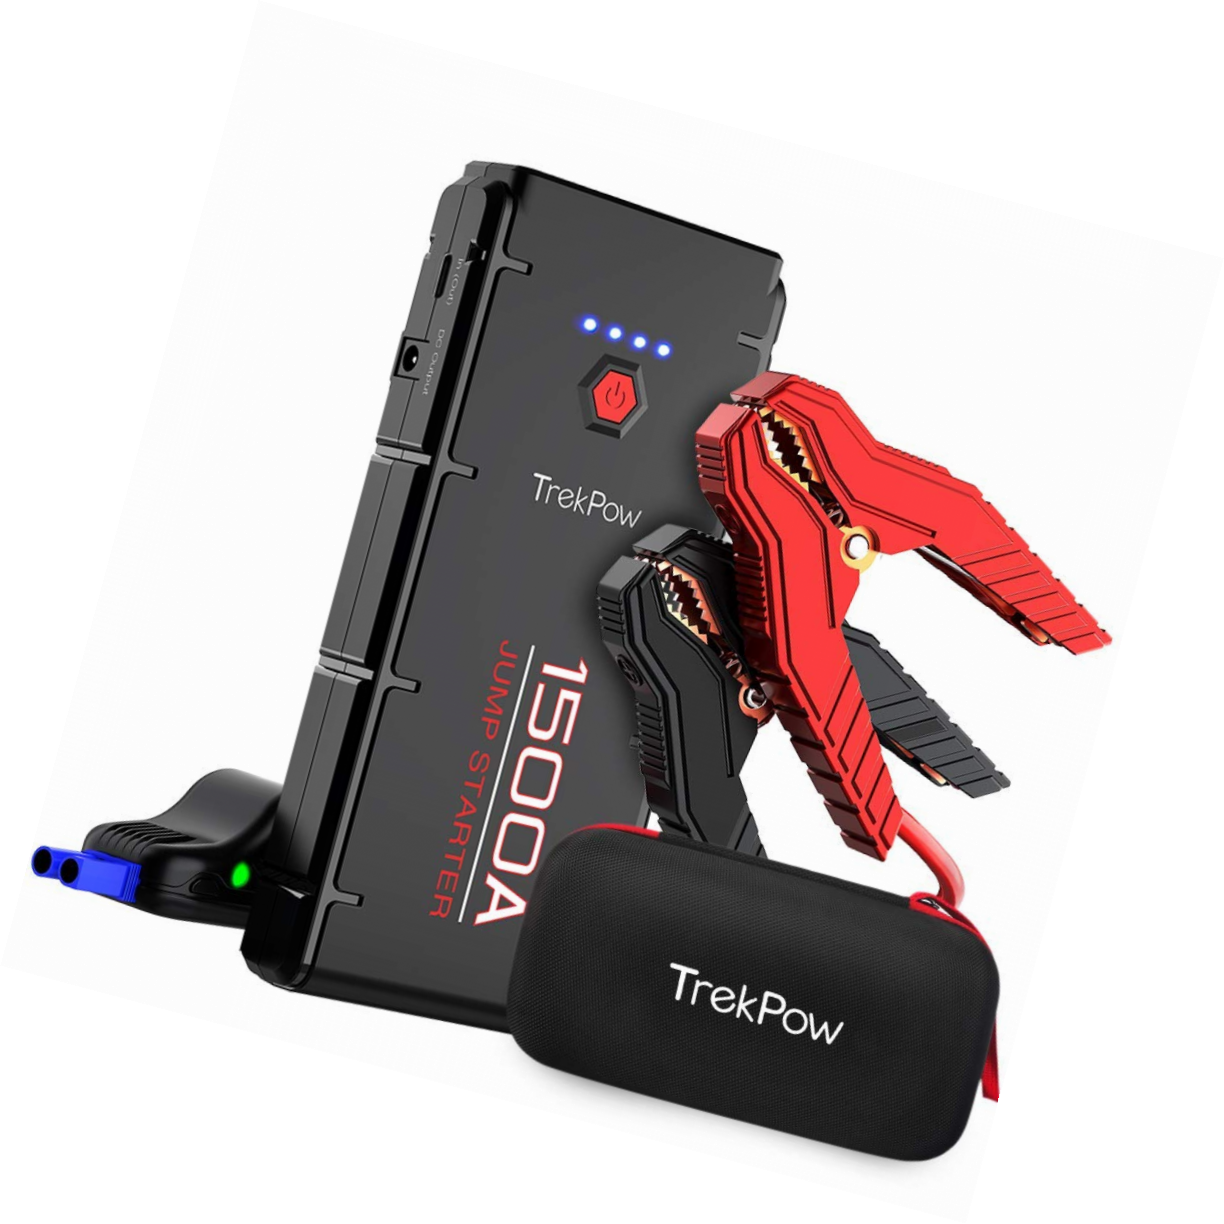 Hands-on with the ABOX TrekPow Jump Starter